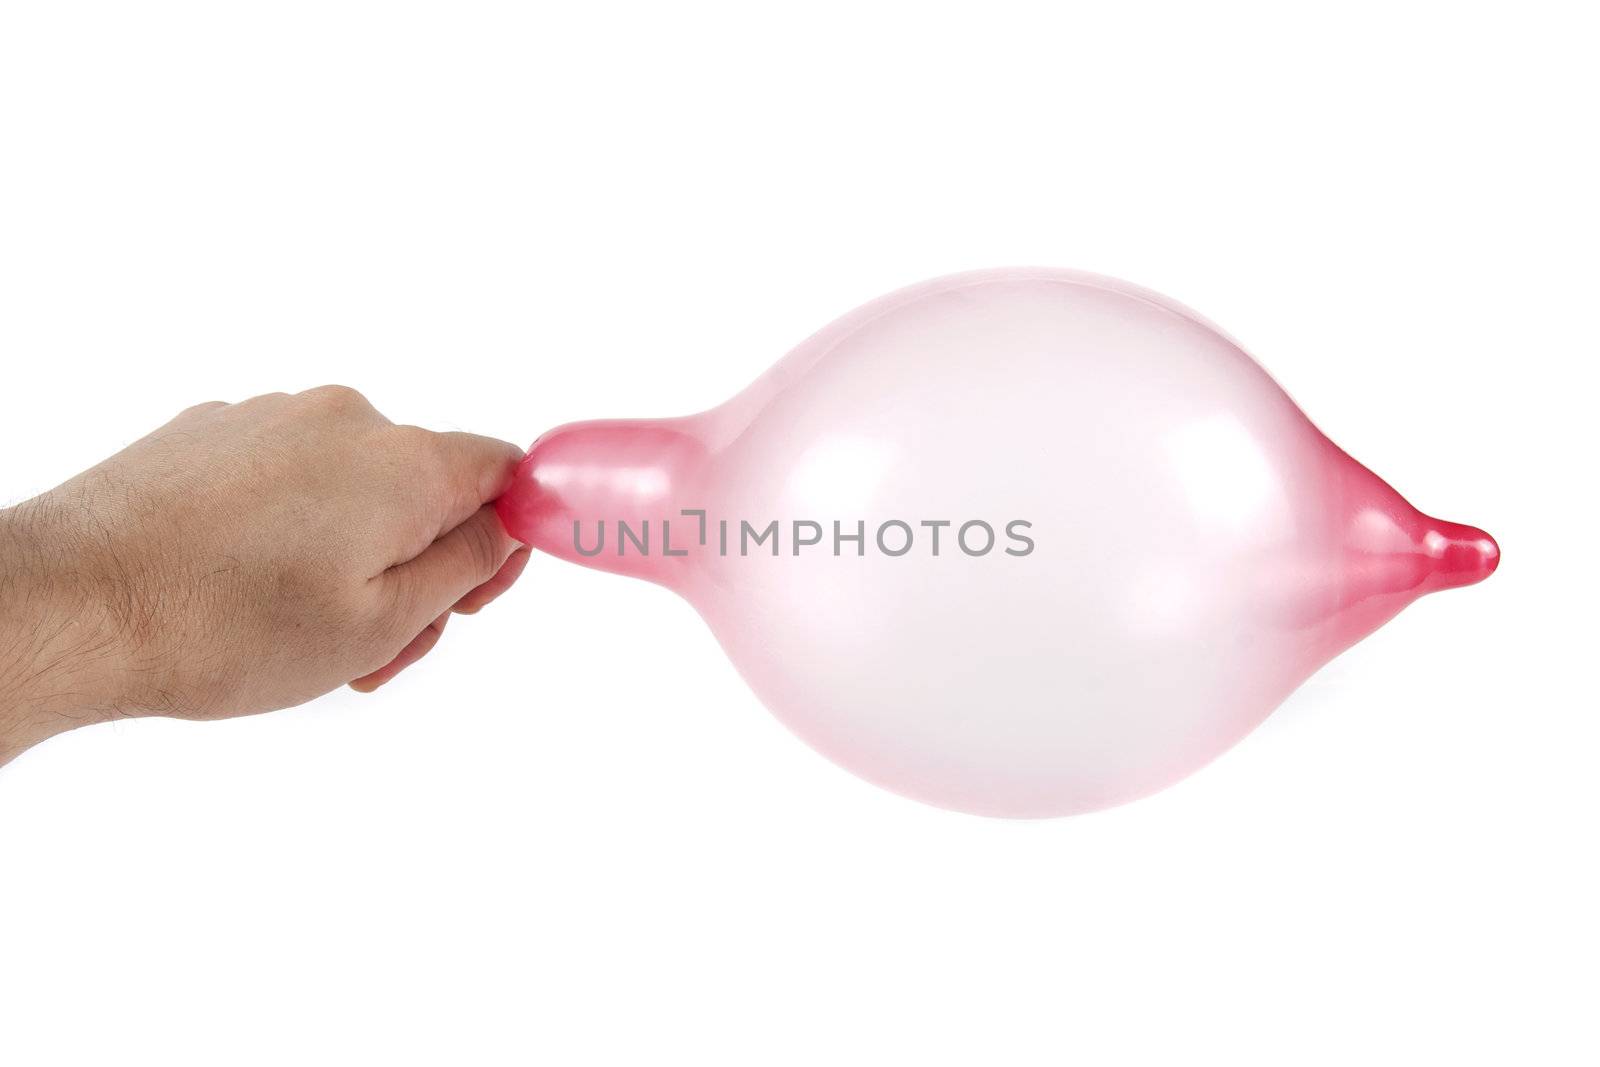 Inflates condom in hand on the white background